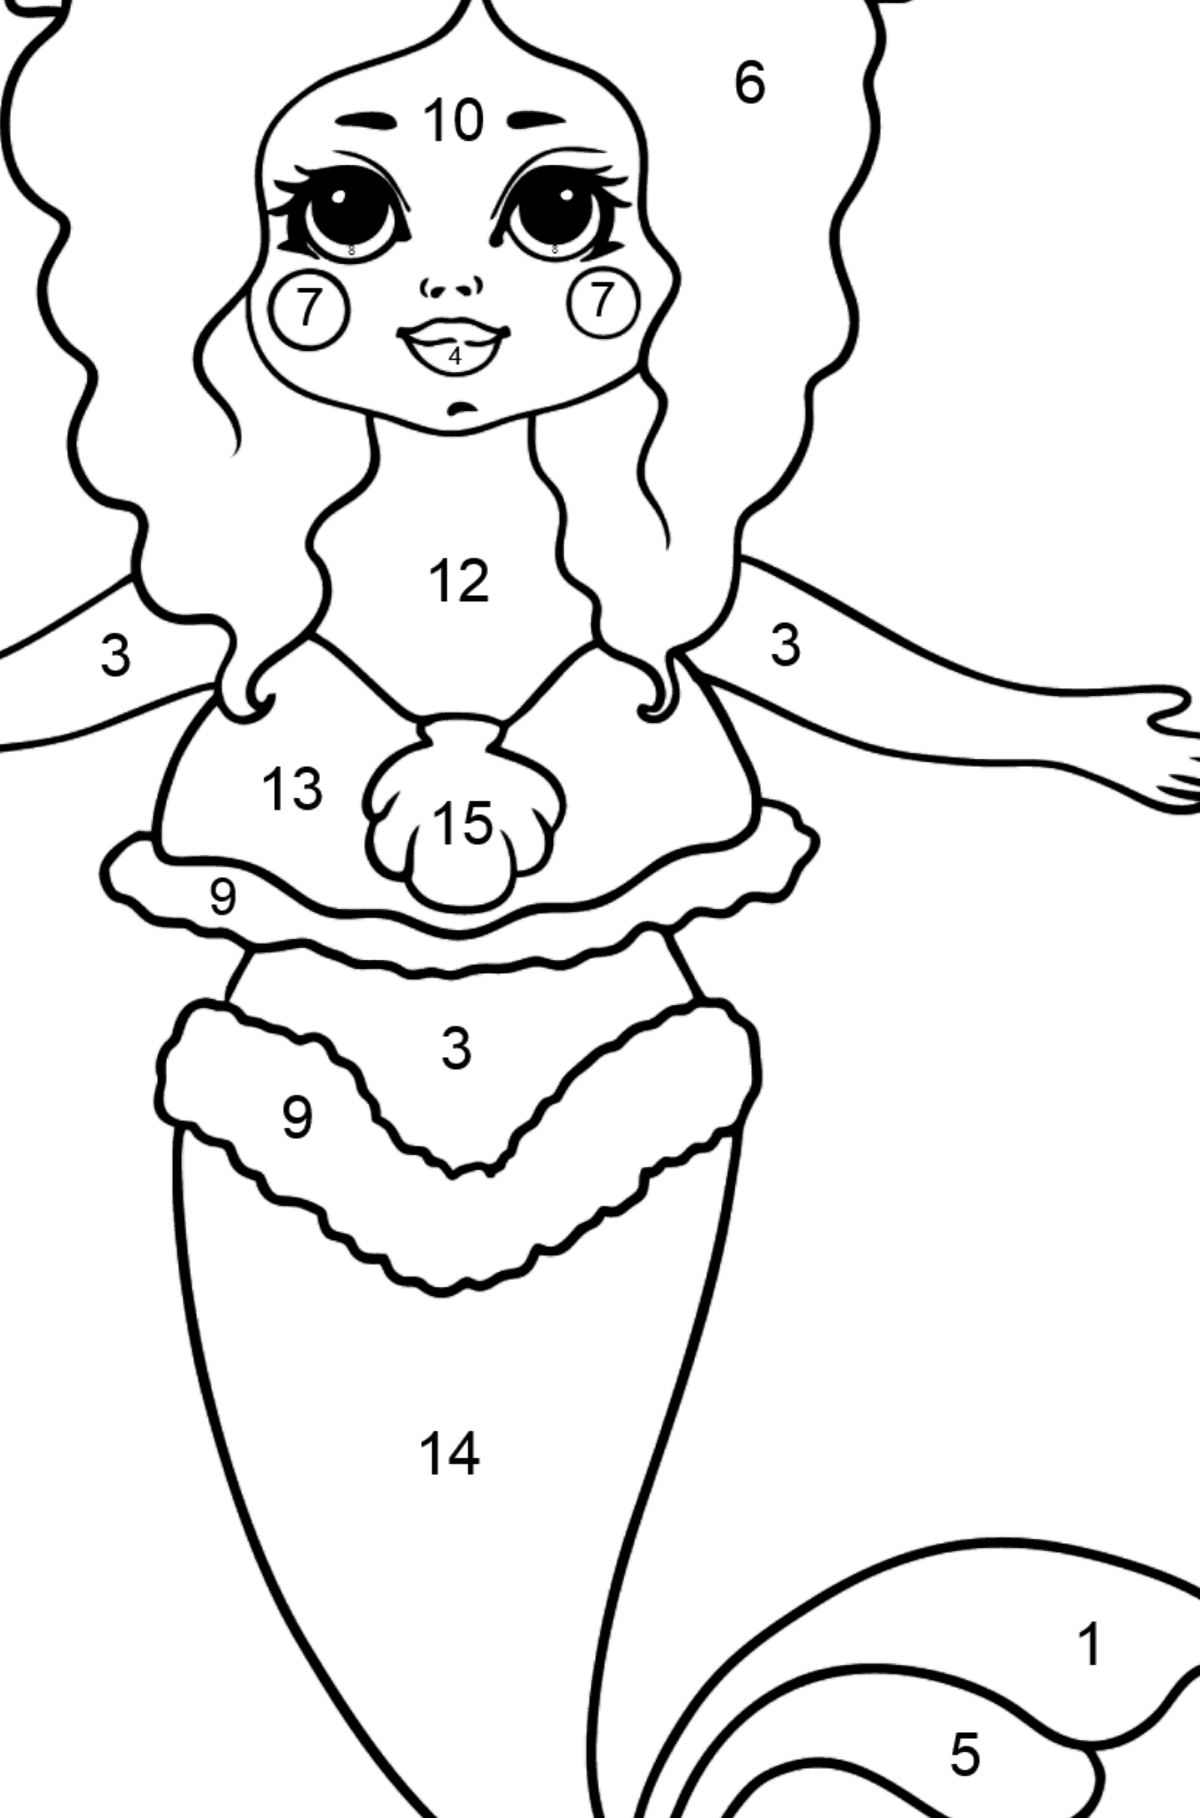 Mermaid with Yellow Tail coloring page - Coloring by Numbers for Kids